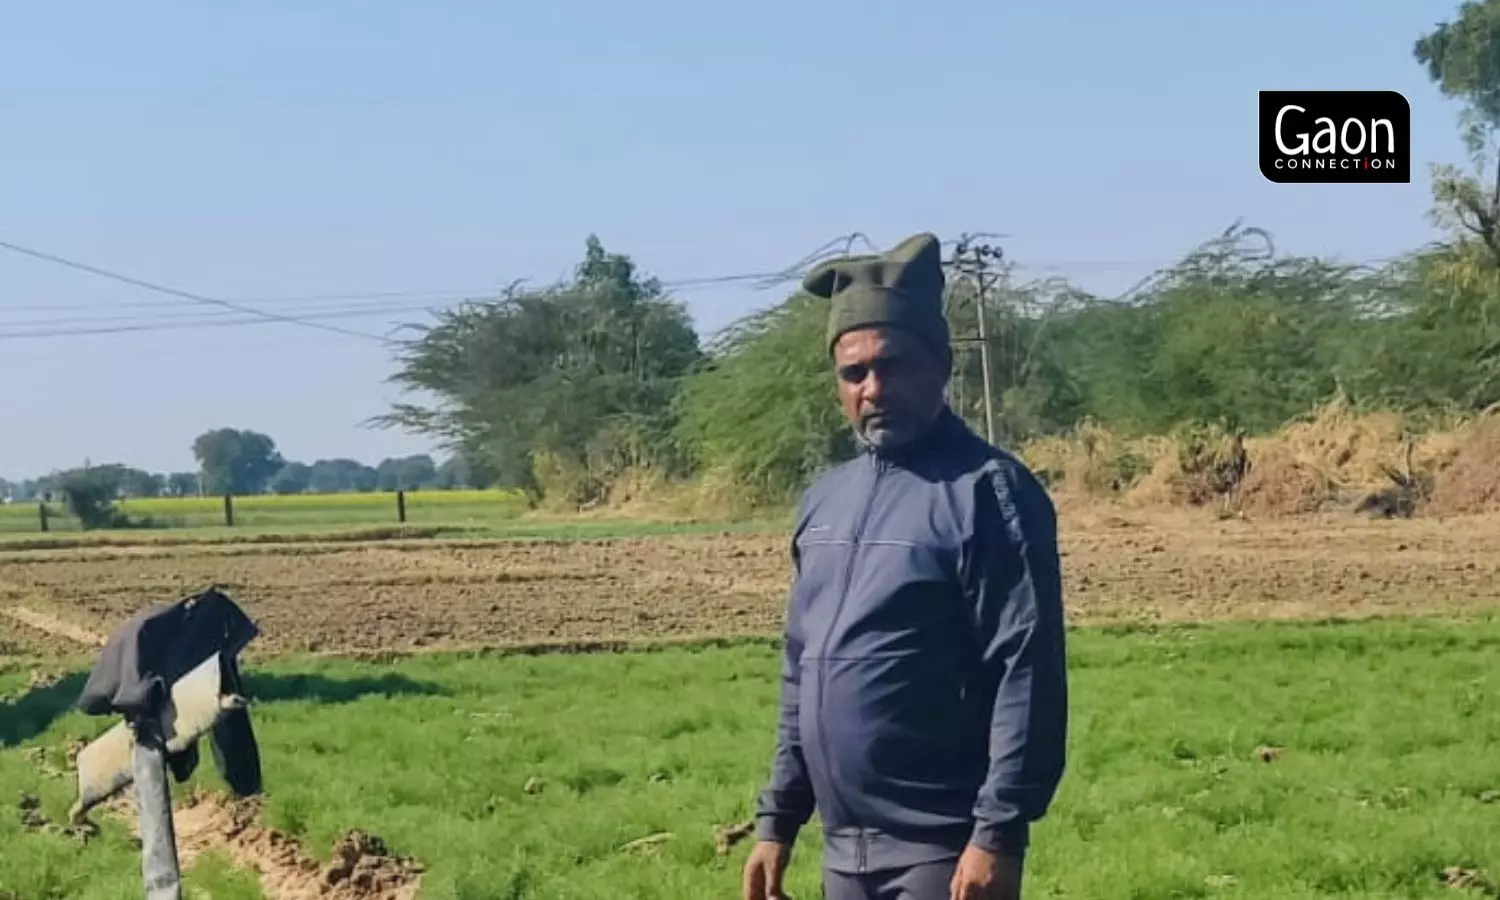 Pradeep Khoja from Nimbol village in Jaitaran tehsil of Pali district has reduced land under cumin cultivation from 2.5 hectares last year to 1.2 hectares this year. Photo by arrangement.